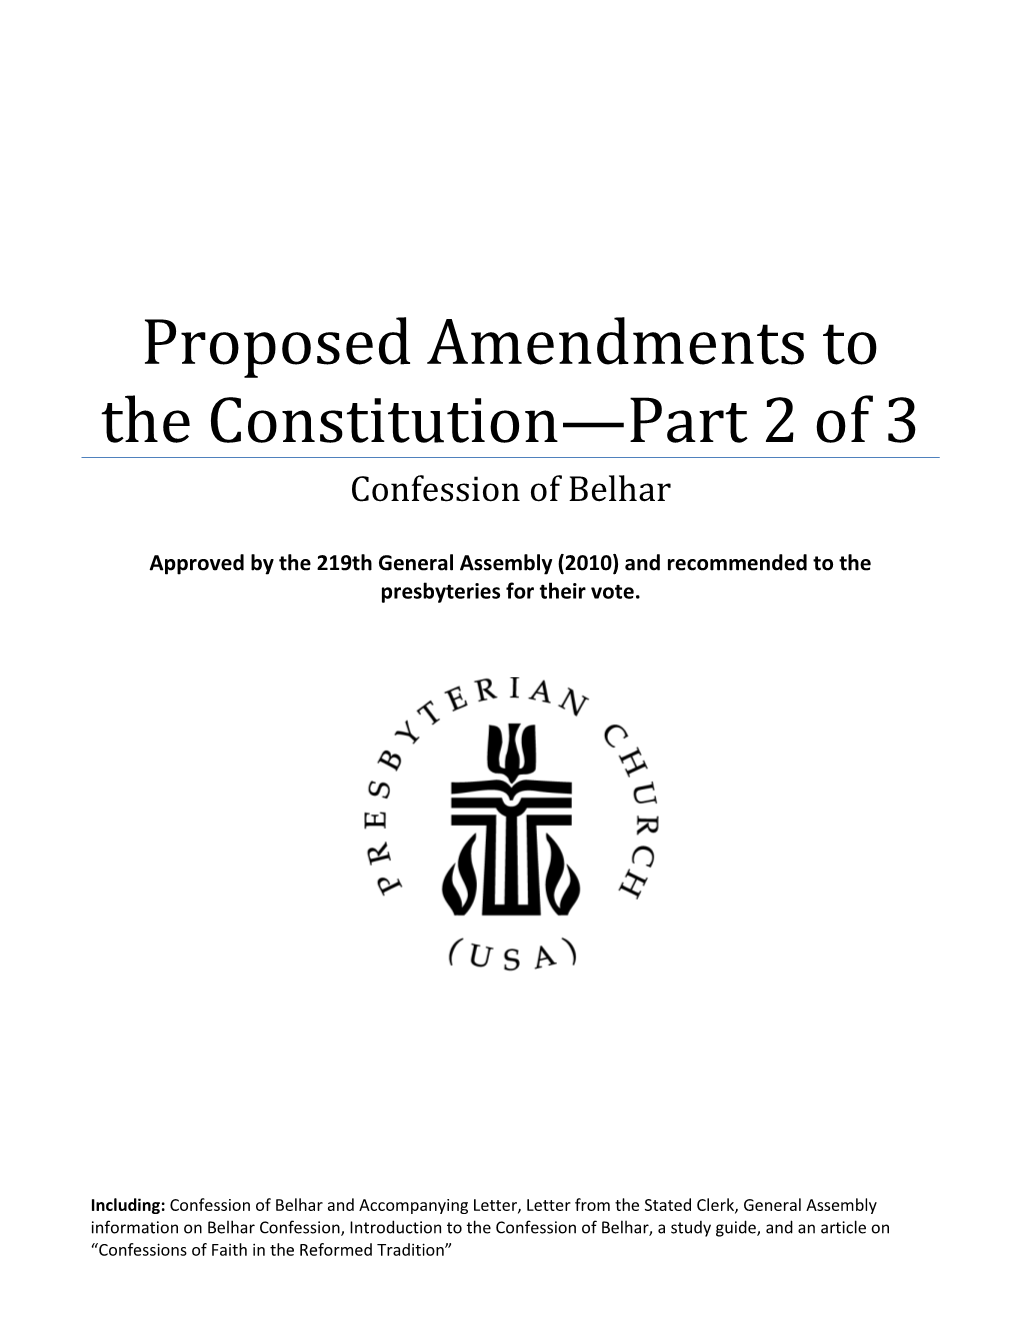 Copy of the Proposed Amendments to the Constitution